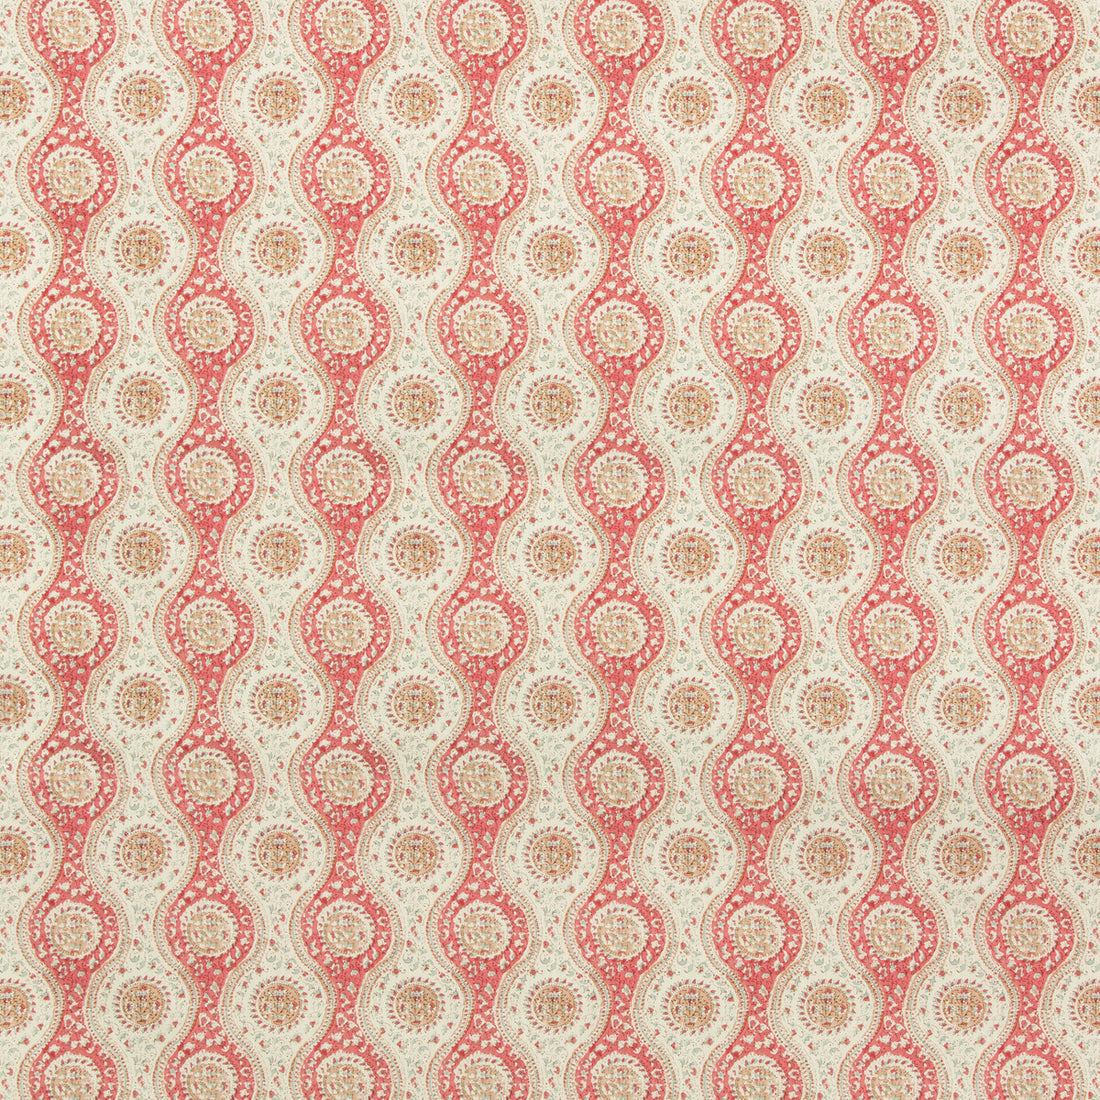 Nadari Print fabric in red/beige color - pattern 8019129.196.0 - by Brunschwig &amp; Fils in the Folio Francais collection